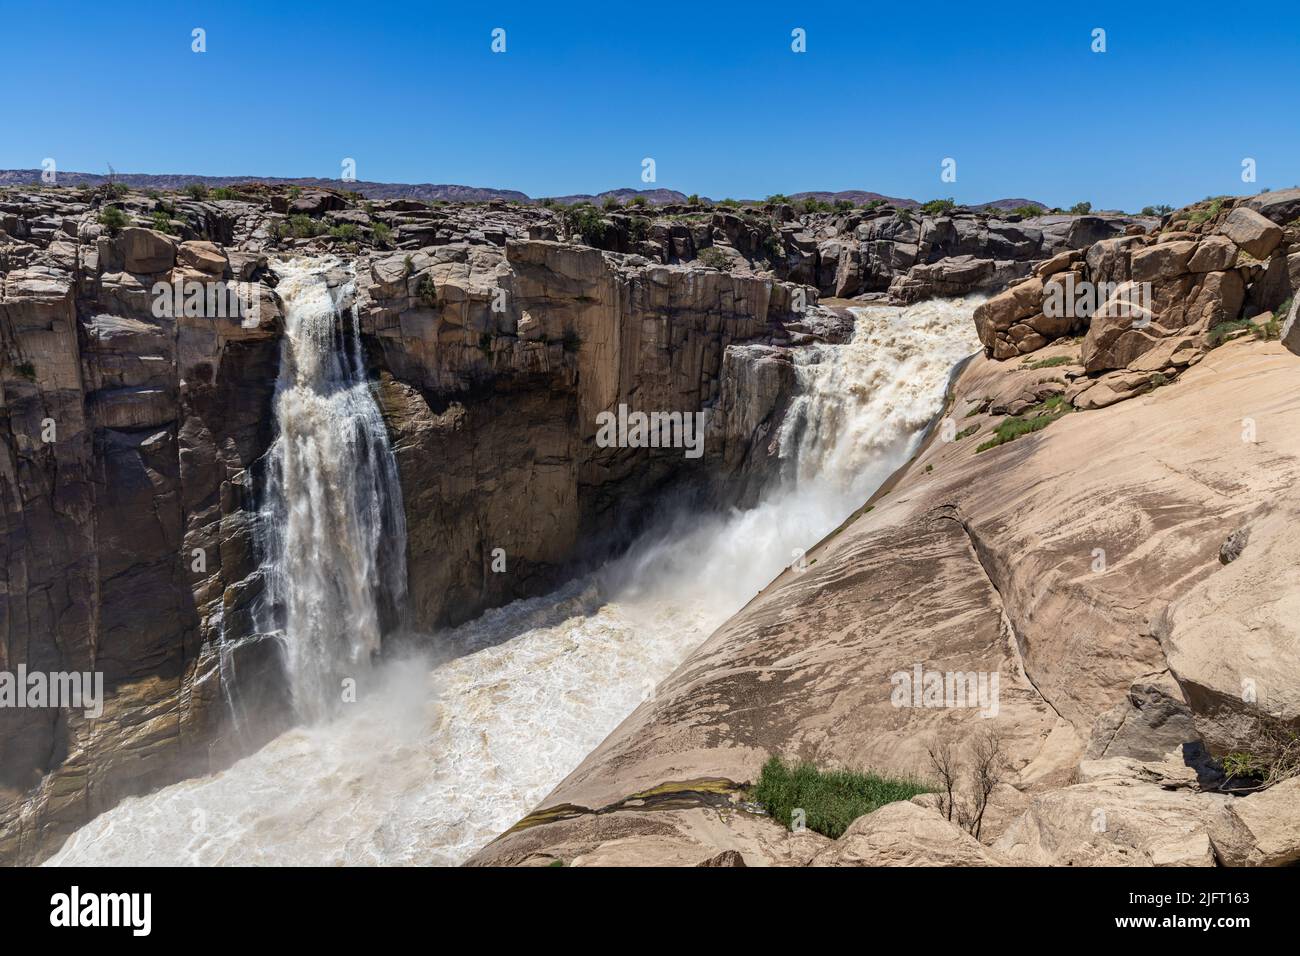 Augrabies Water fall in the Orange river during flood season.  The waterfall is in the semi arid area of the Northern Cape Province of South Africa Stock Photo